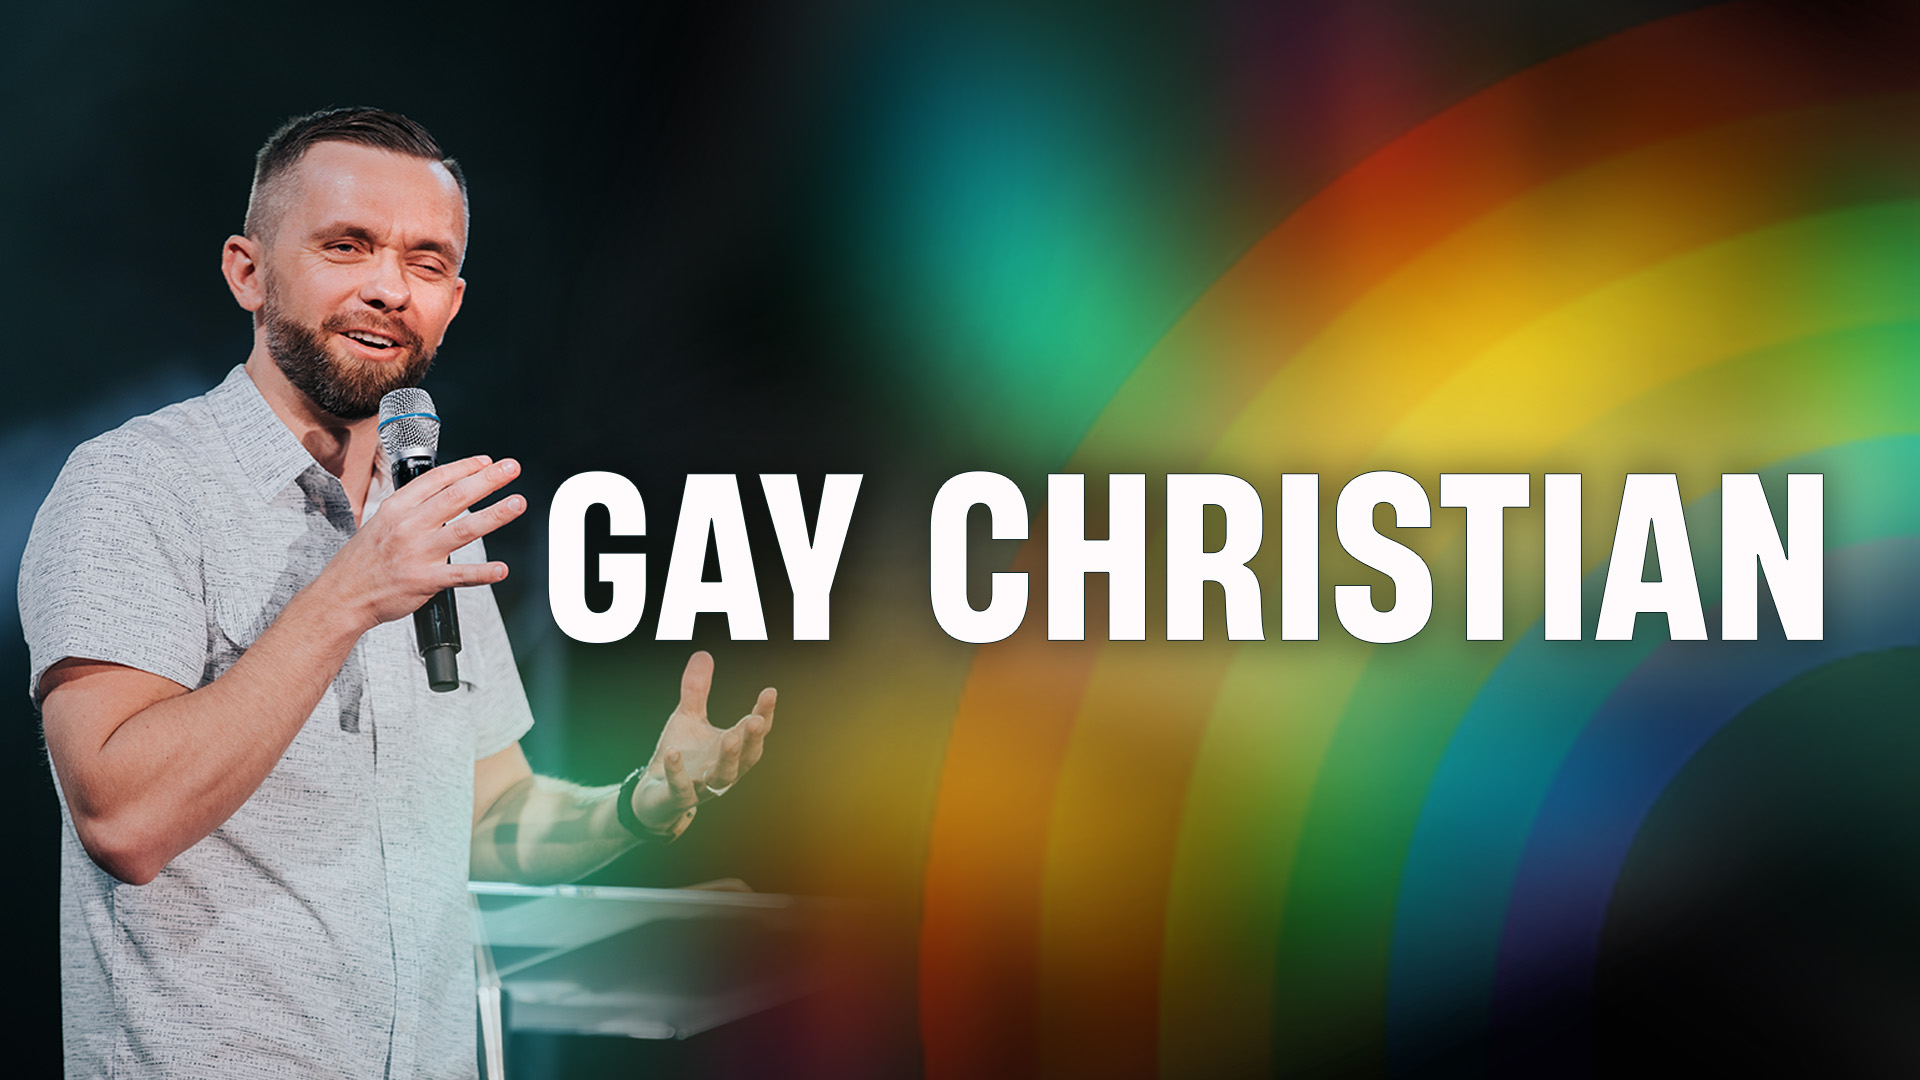 Featured Image for “Can a Homosexual be a Christian?”